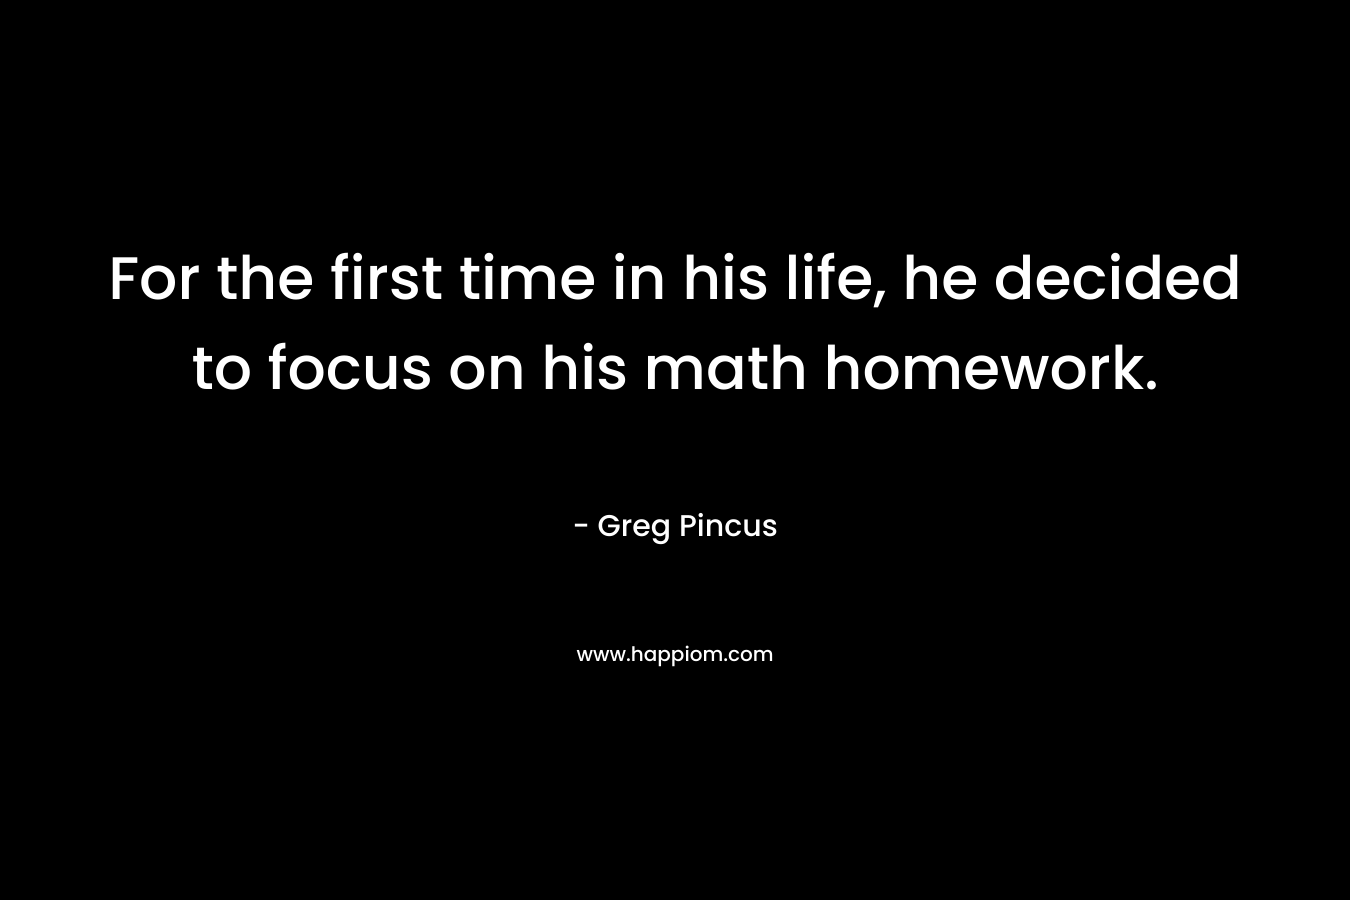 For the first time in his life, he decided to focus on his math homework. – Greg Pincus